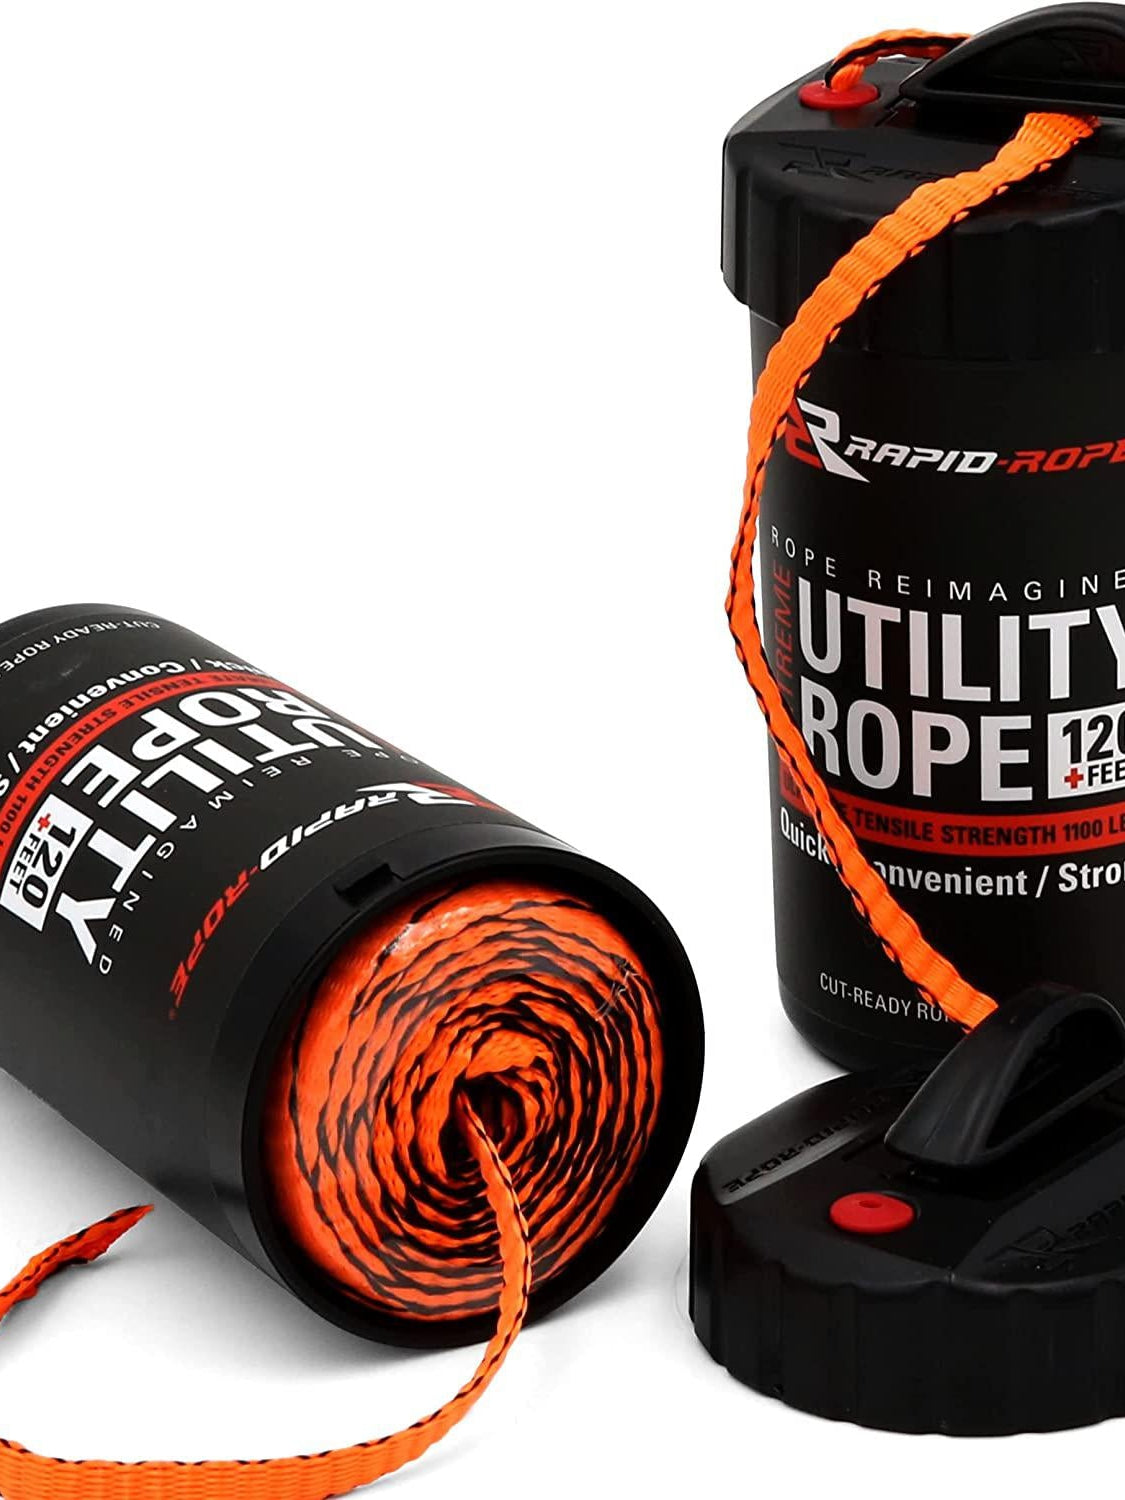 Rapid Rope Canisters, Rope In a Can, 120 Feet